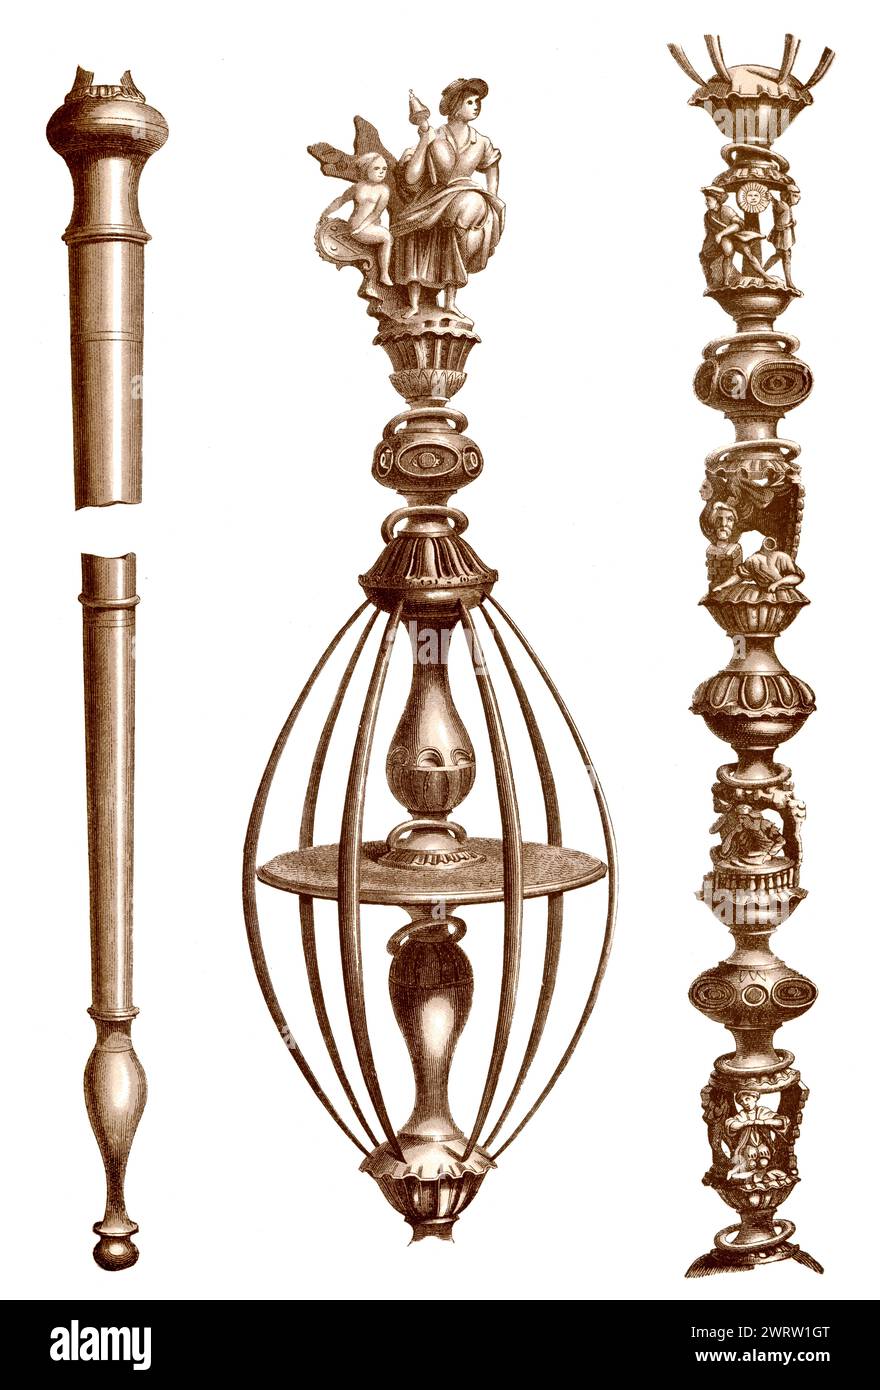 A typical Valdôtain style distaff or quenouille, 16th century Stock Photo